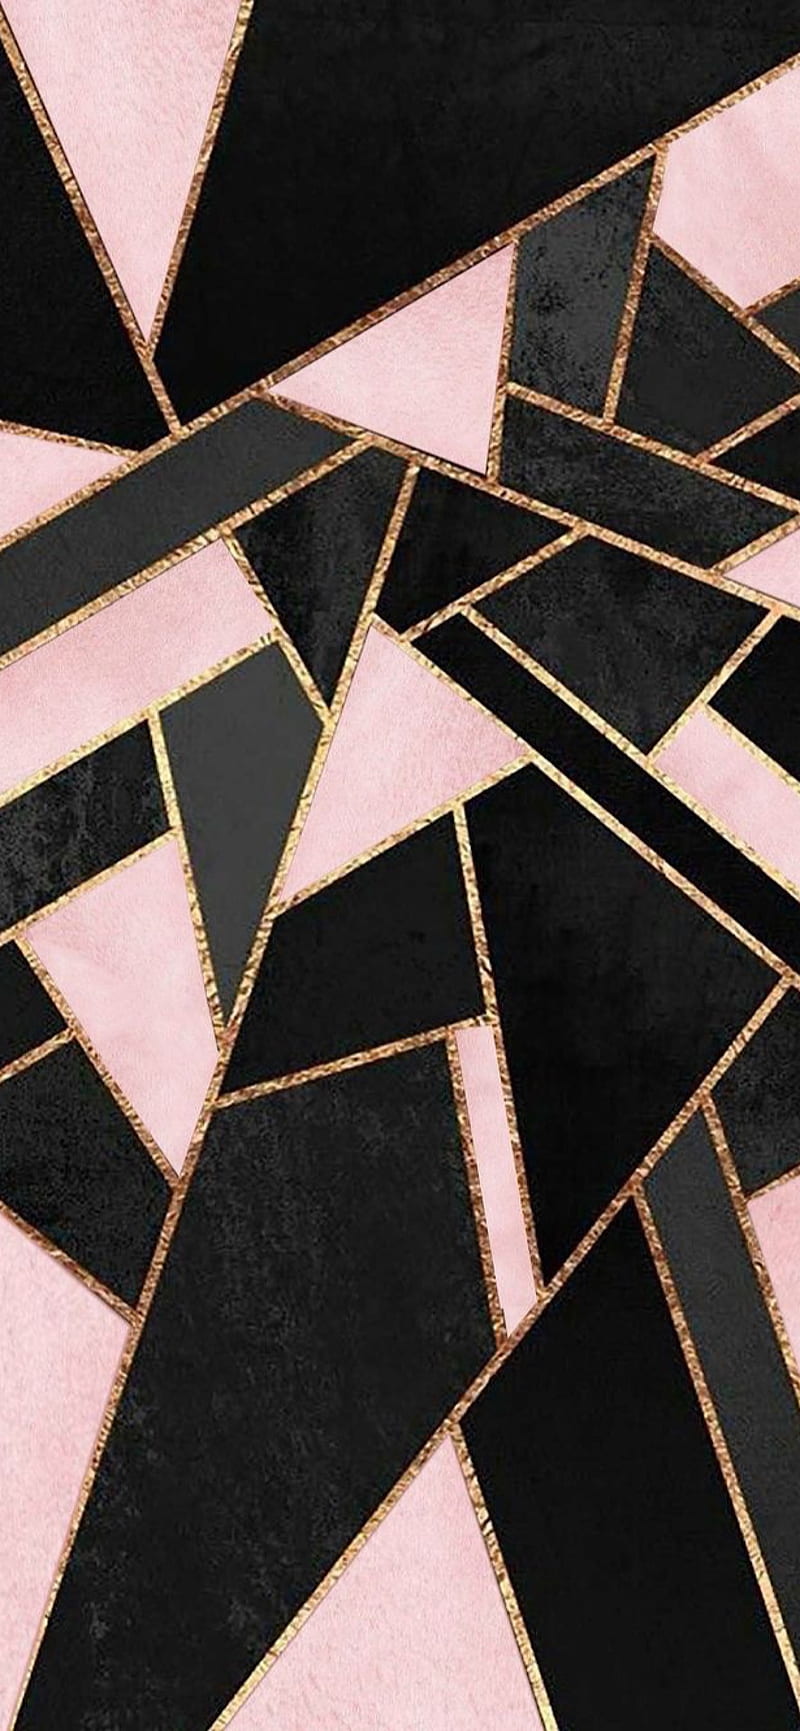 1920x1080px, 1080P free download | Pink and Gold, abstract, black